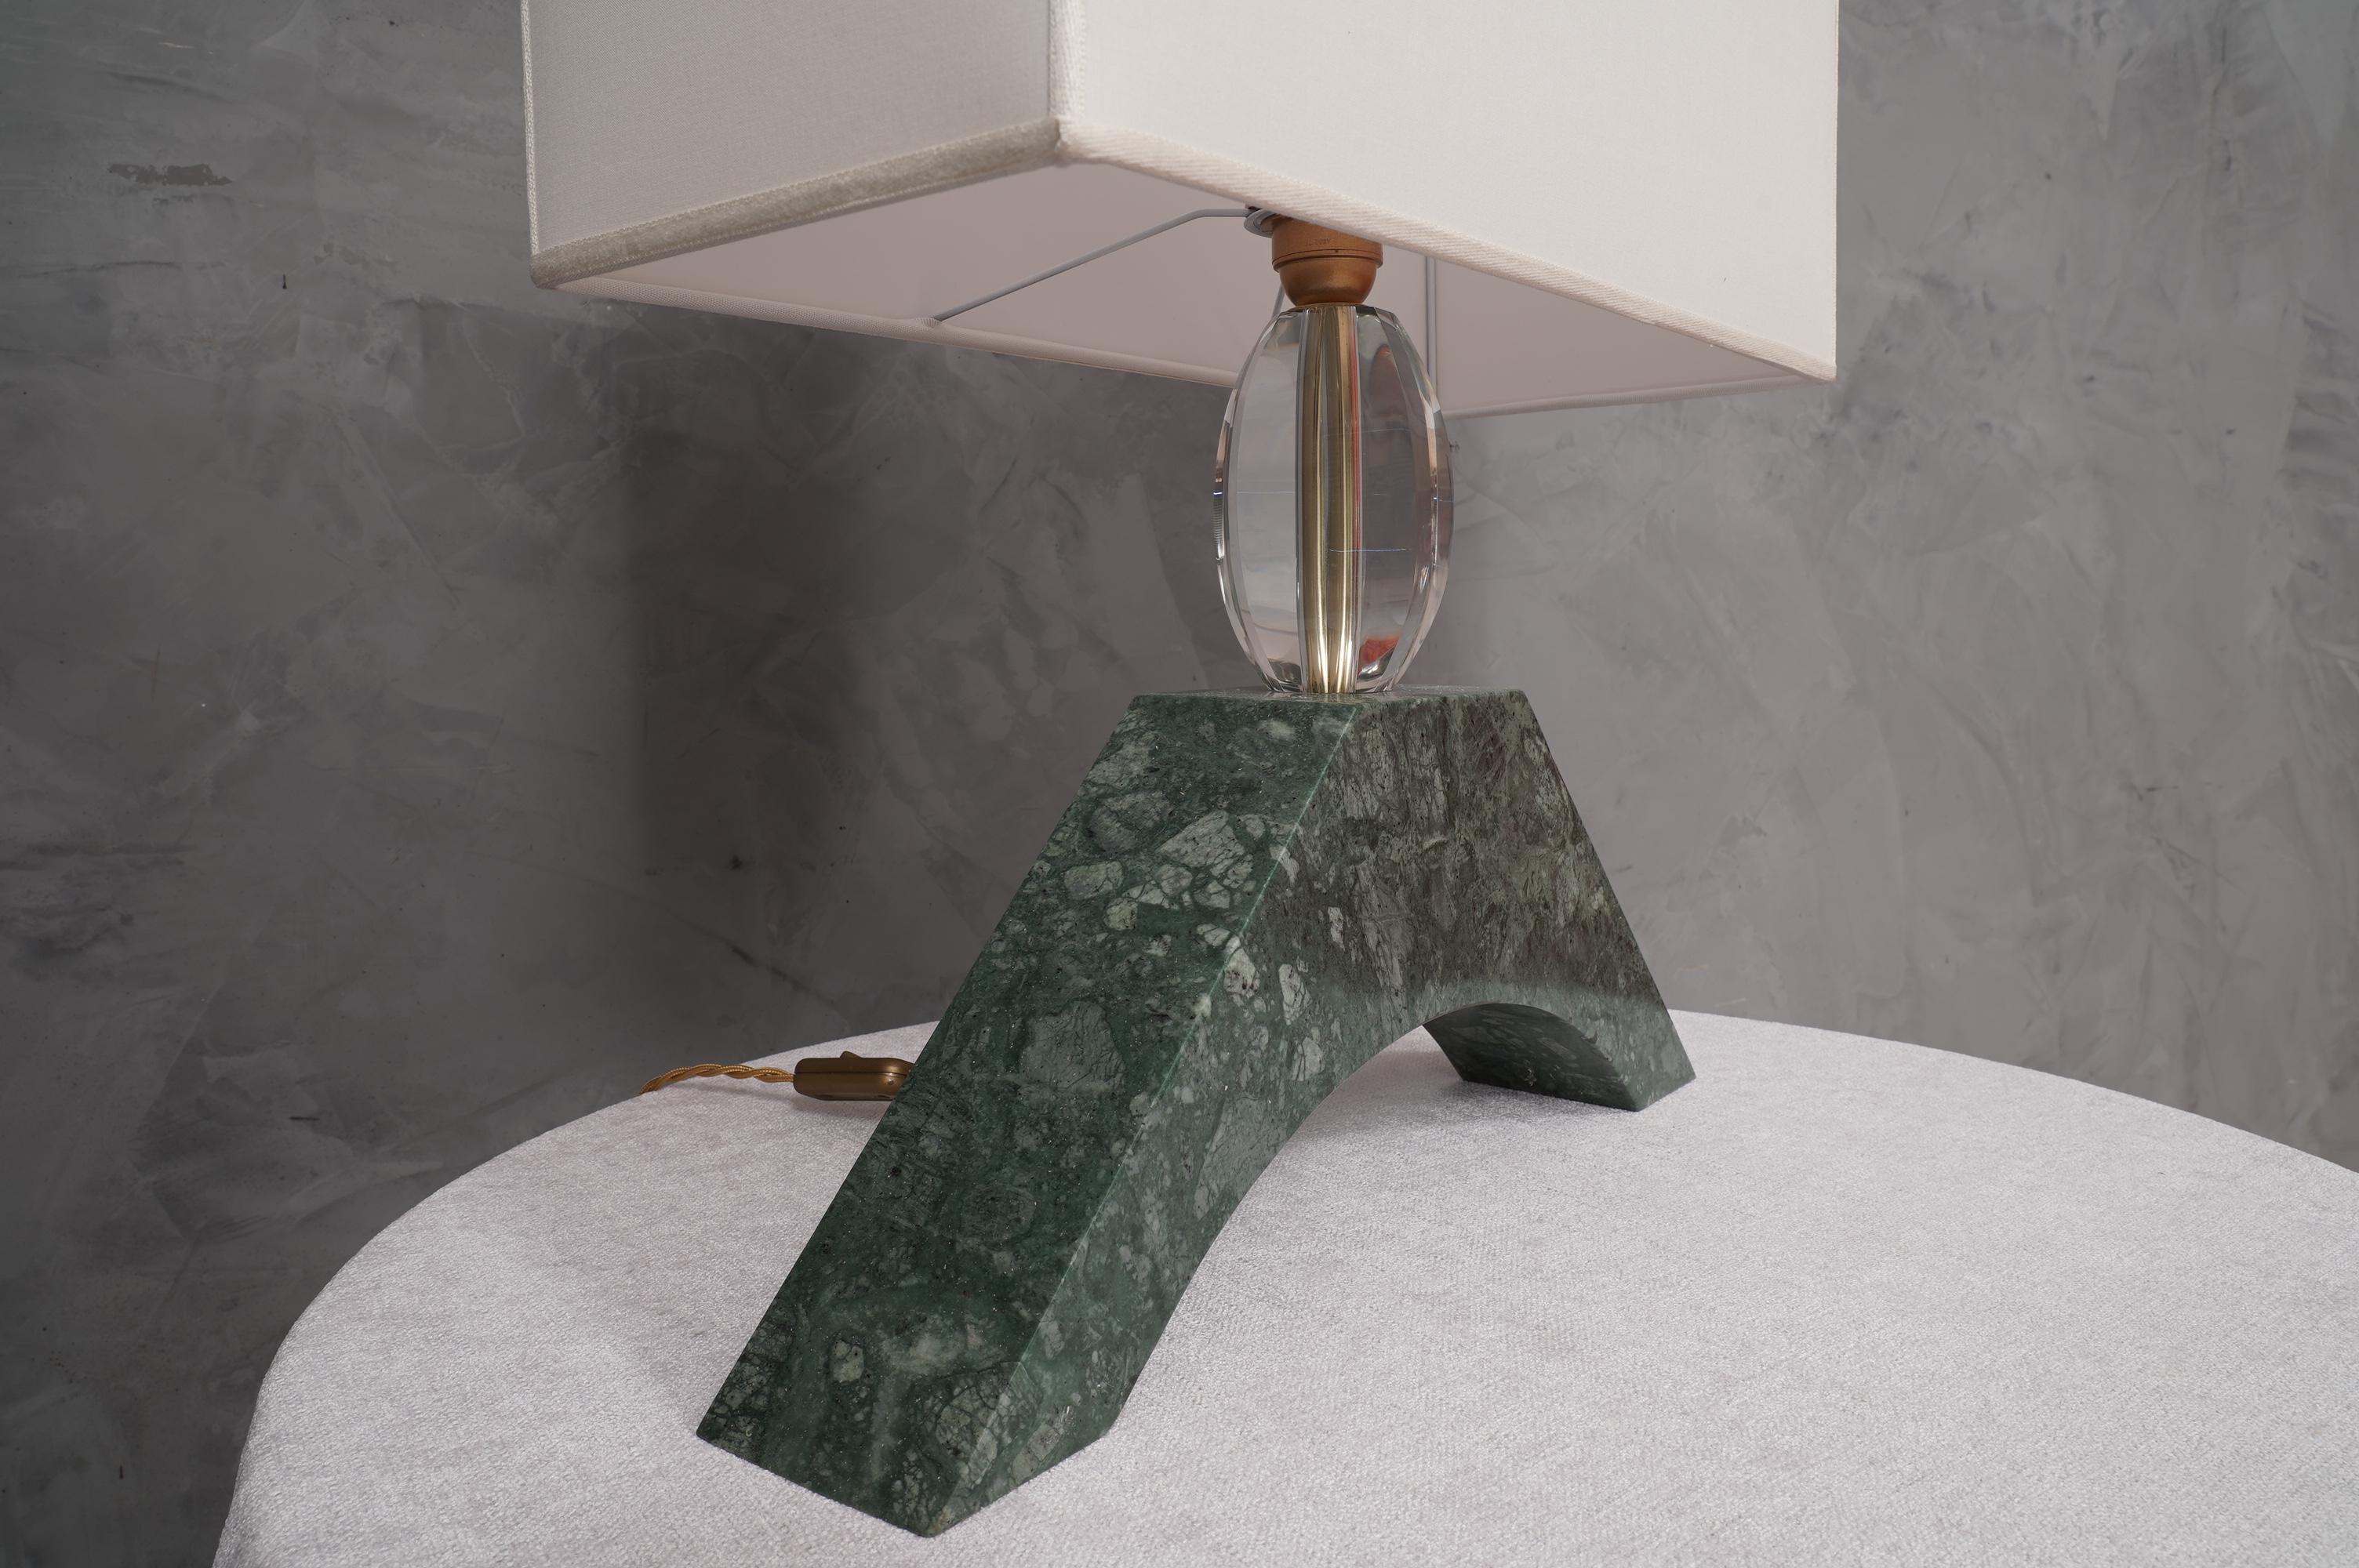 Indian Green Marble and Murano Glass Table Lamp, 2000 For Sale 1